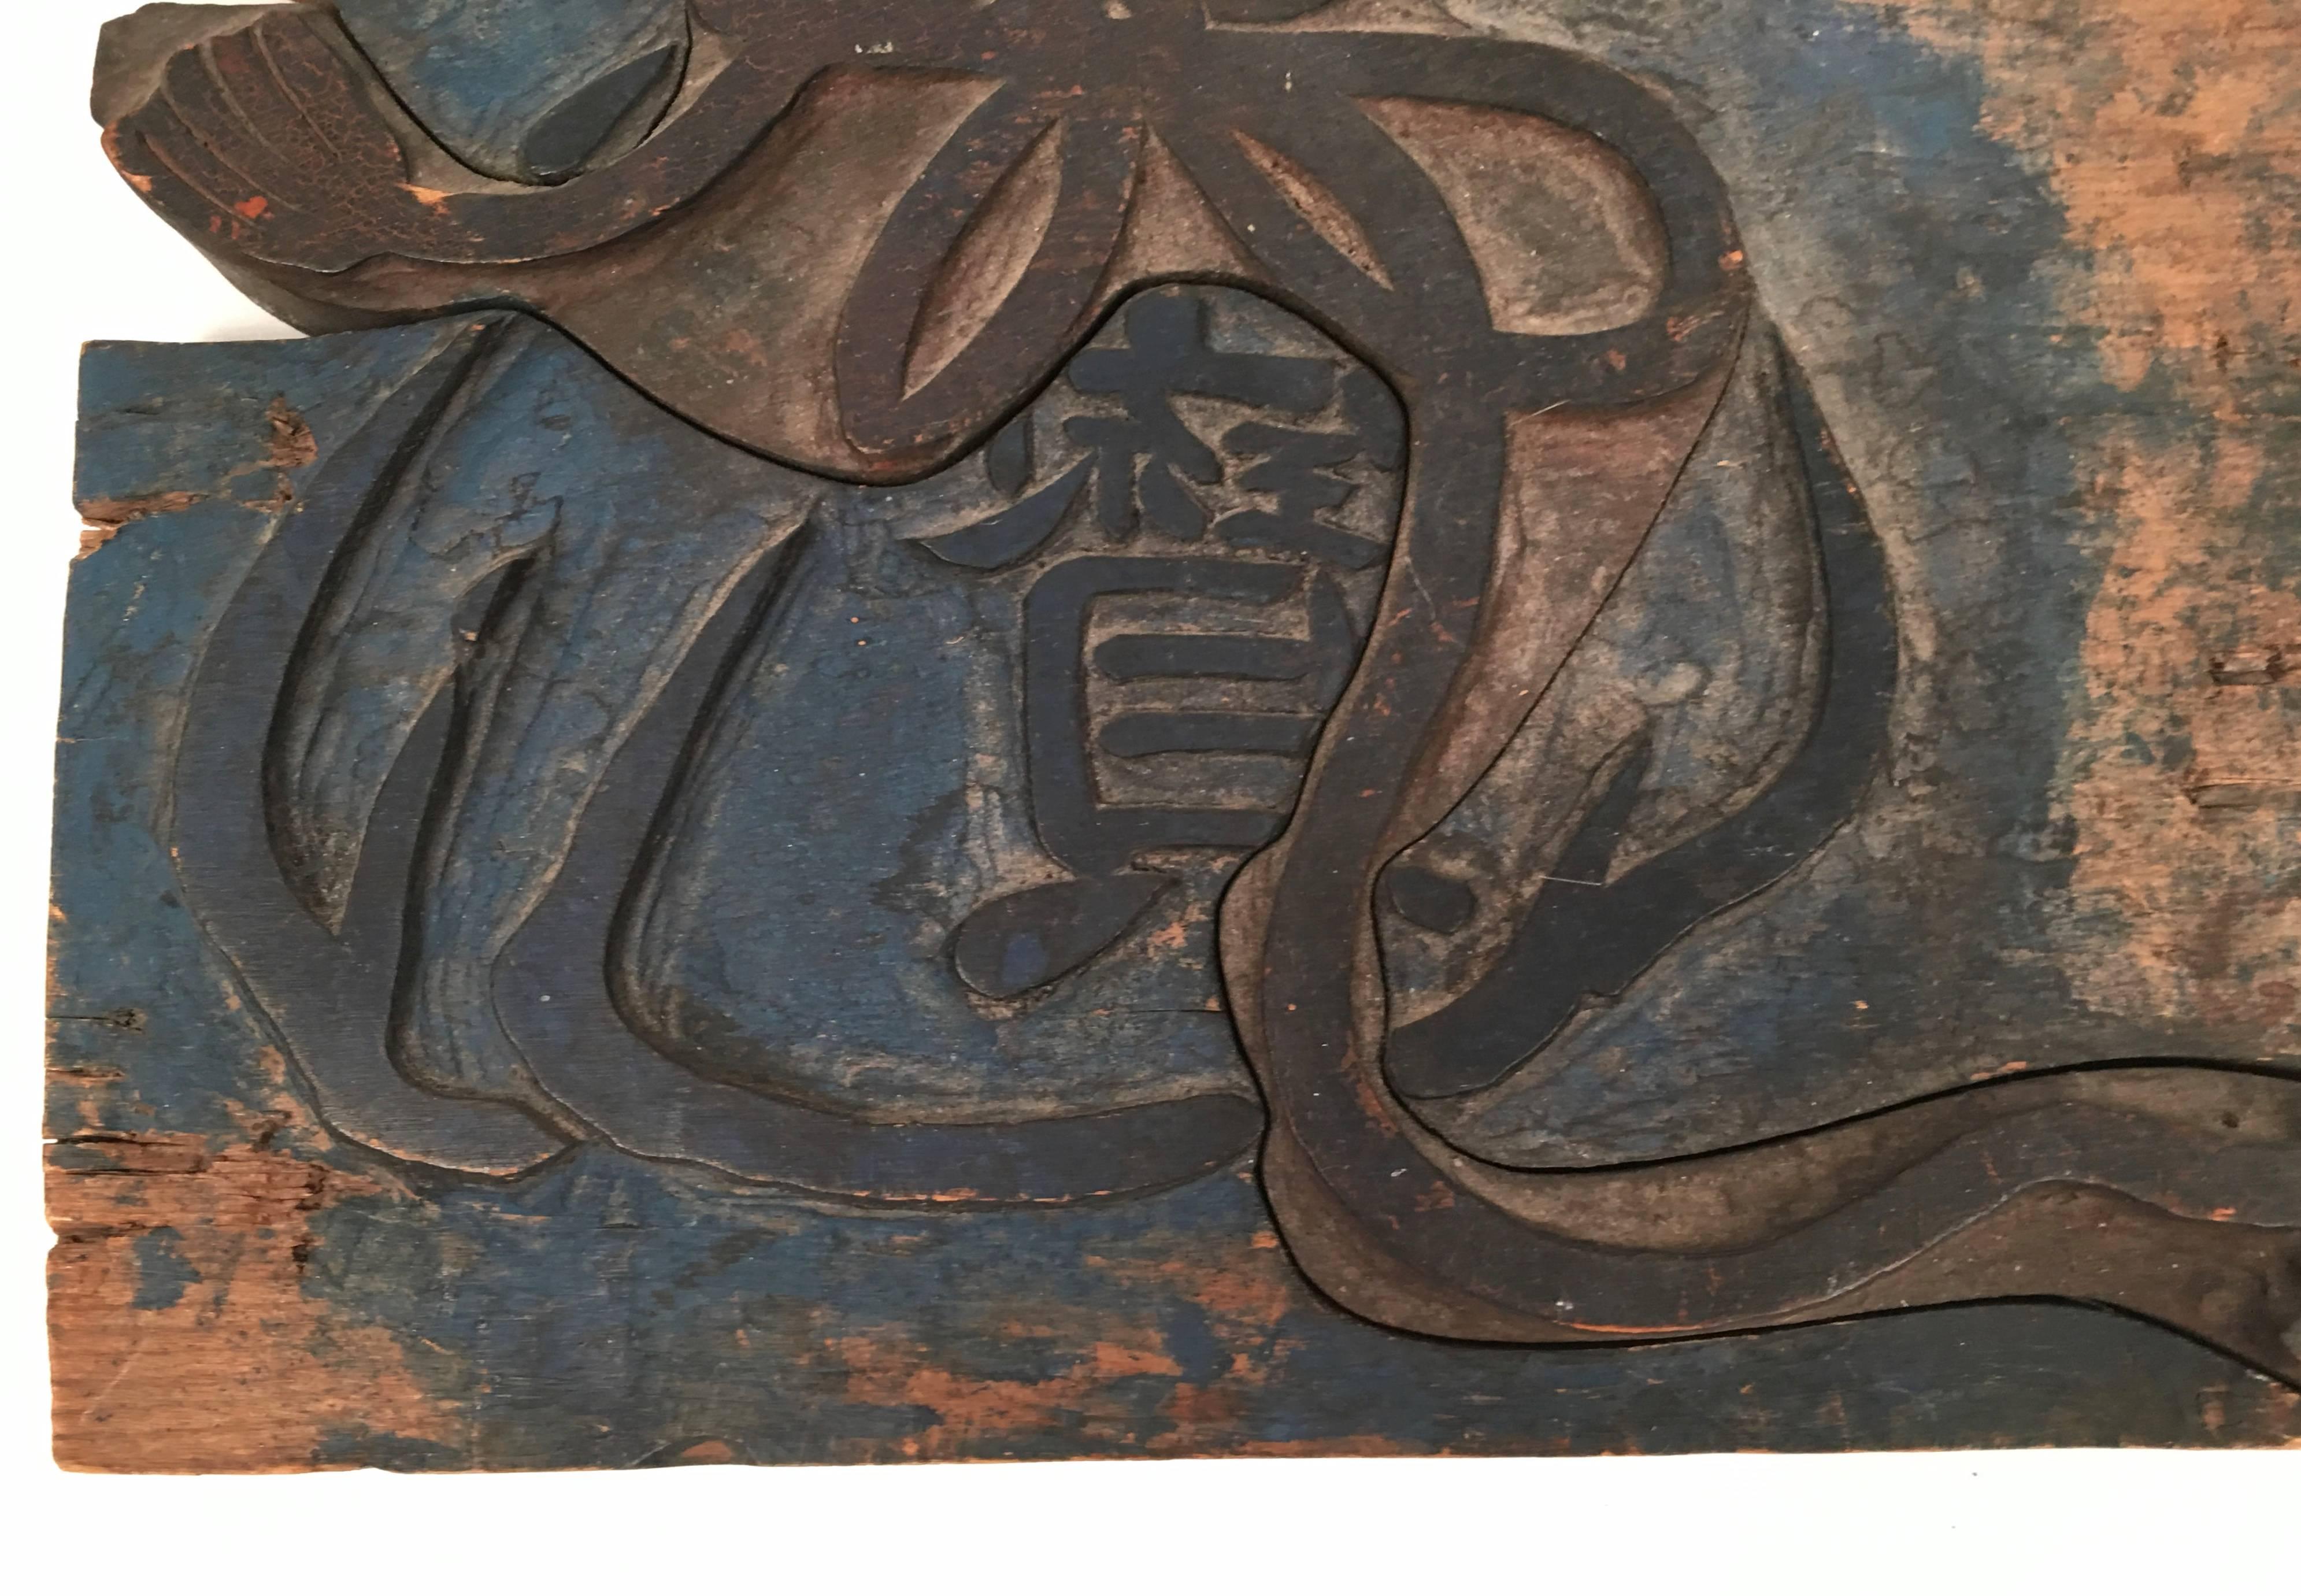 An antique Chinese printer's wood block, carved with the character 'bao,' meaning 'precious,' playfully centered within a ribbon tied cloth sack, suggesting that the contents are valuable. The square block is carved in two interlocking sections and